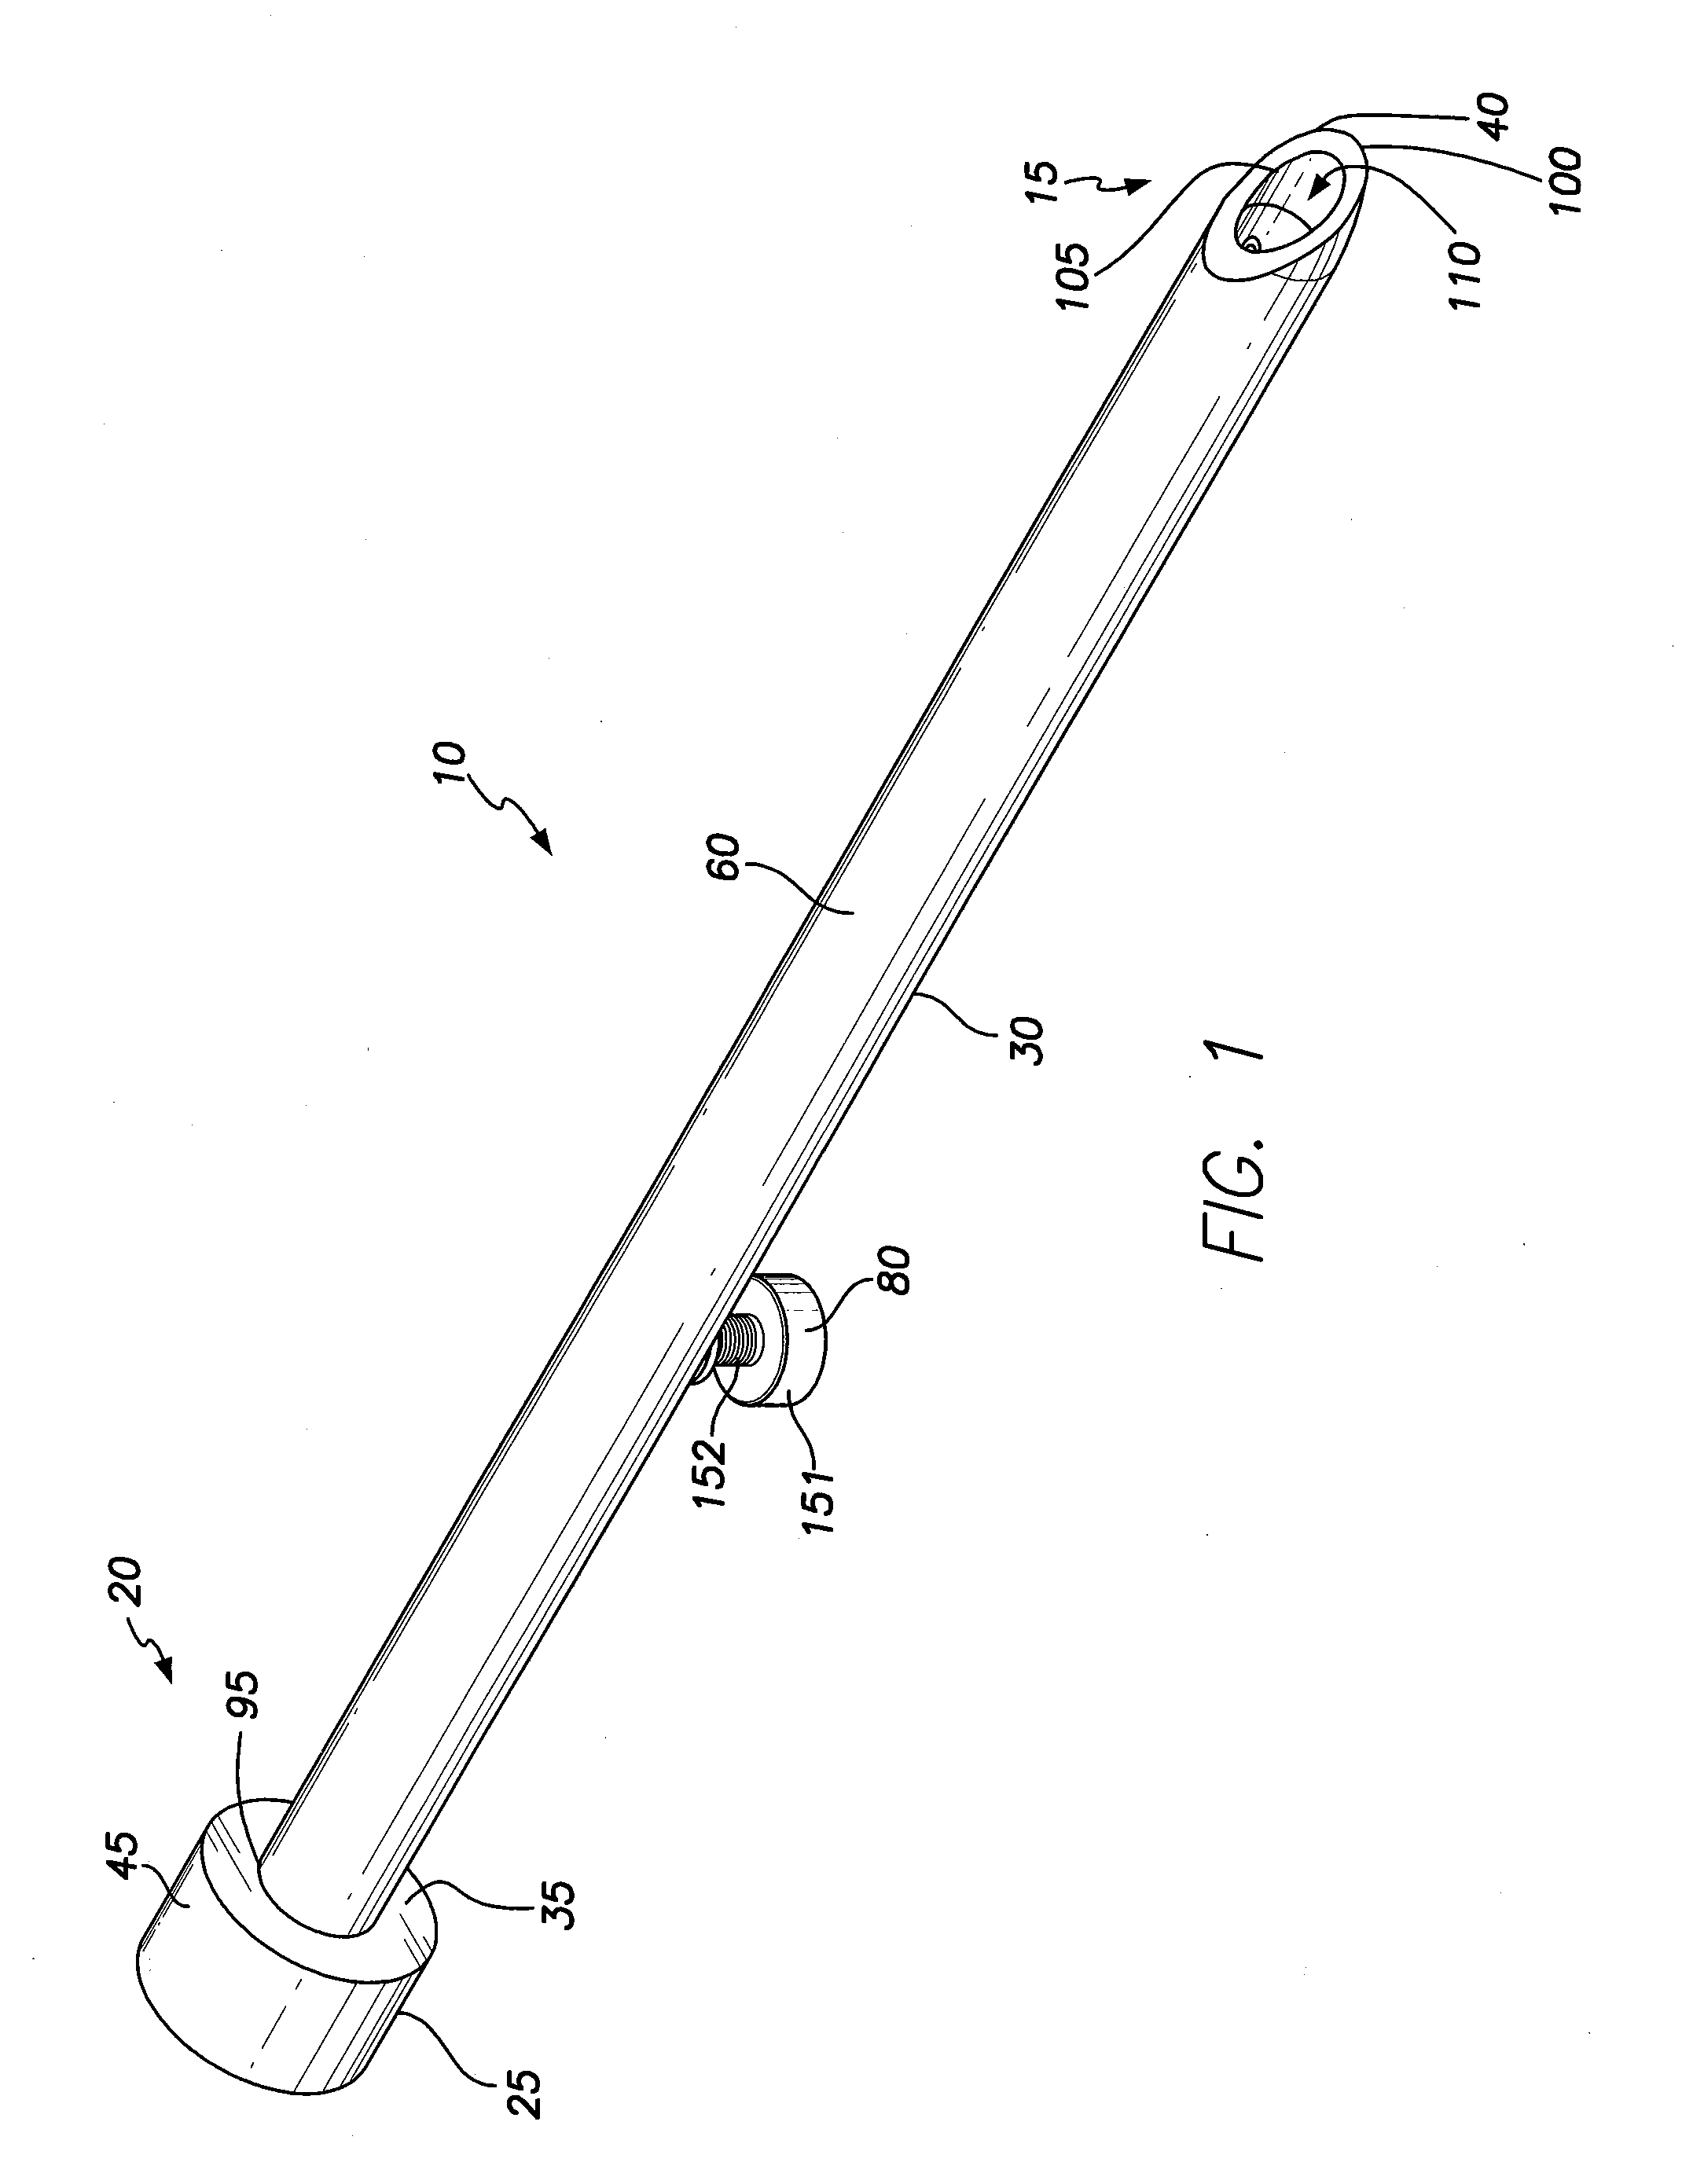 Apparatus and method for accessing an intrapericardial space